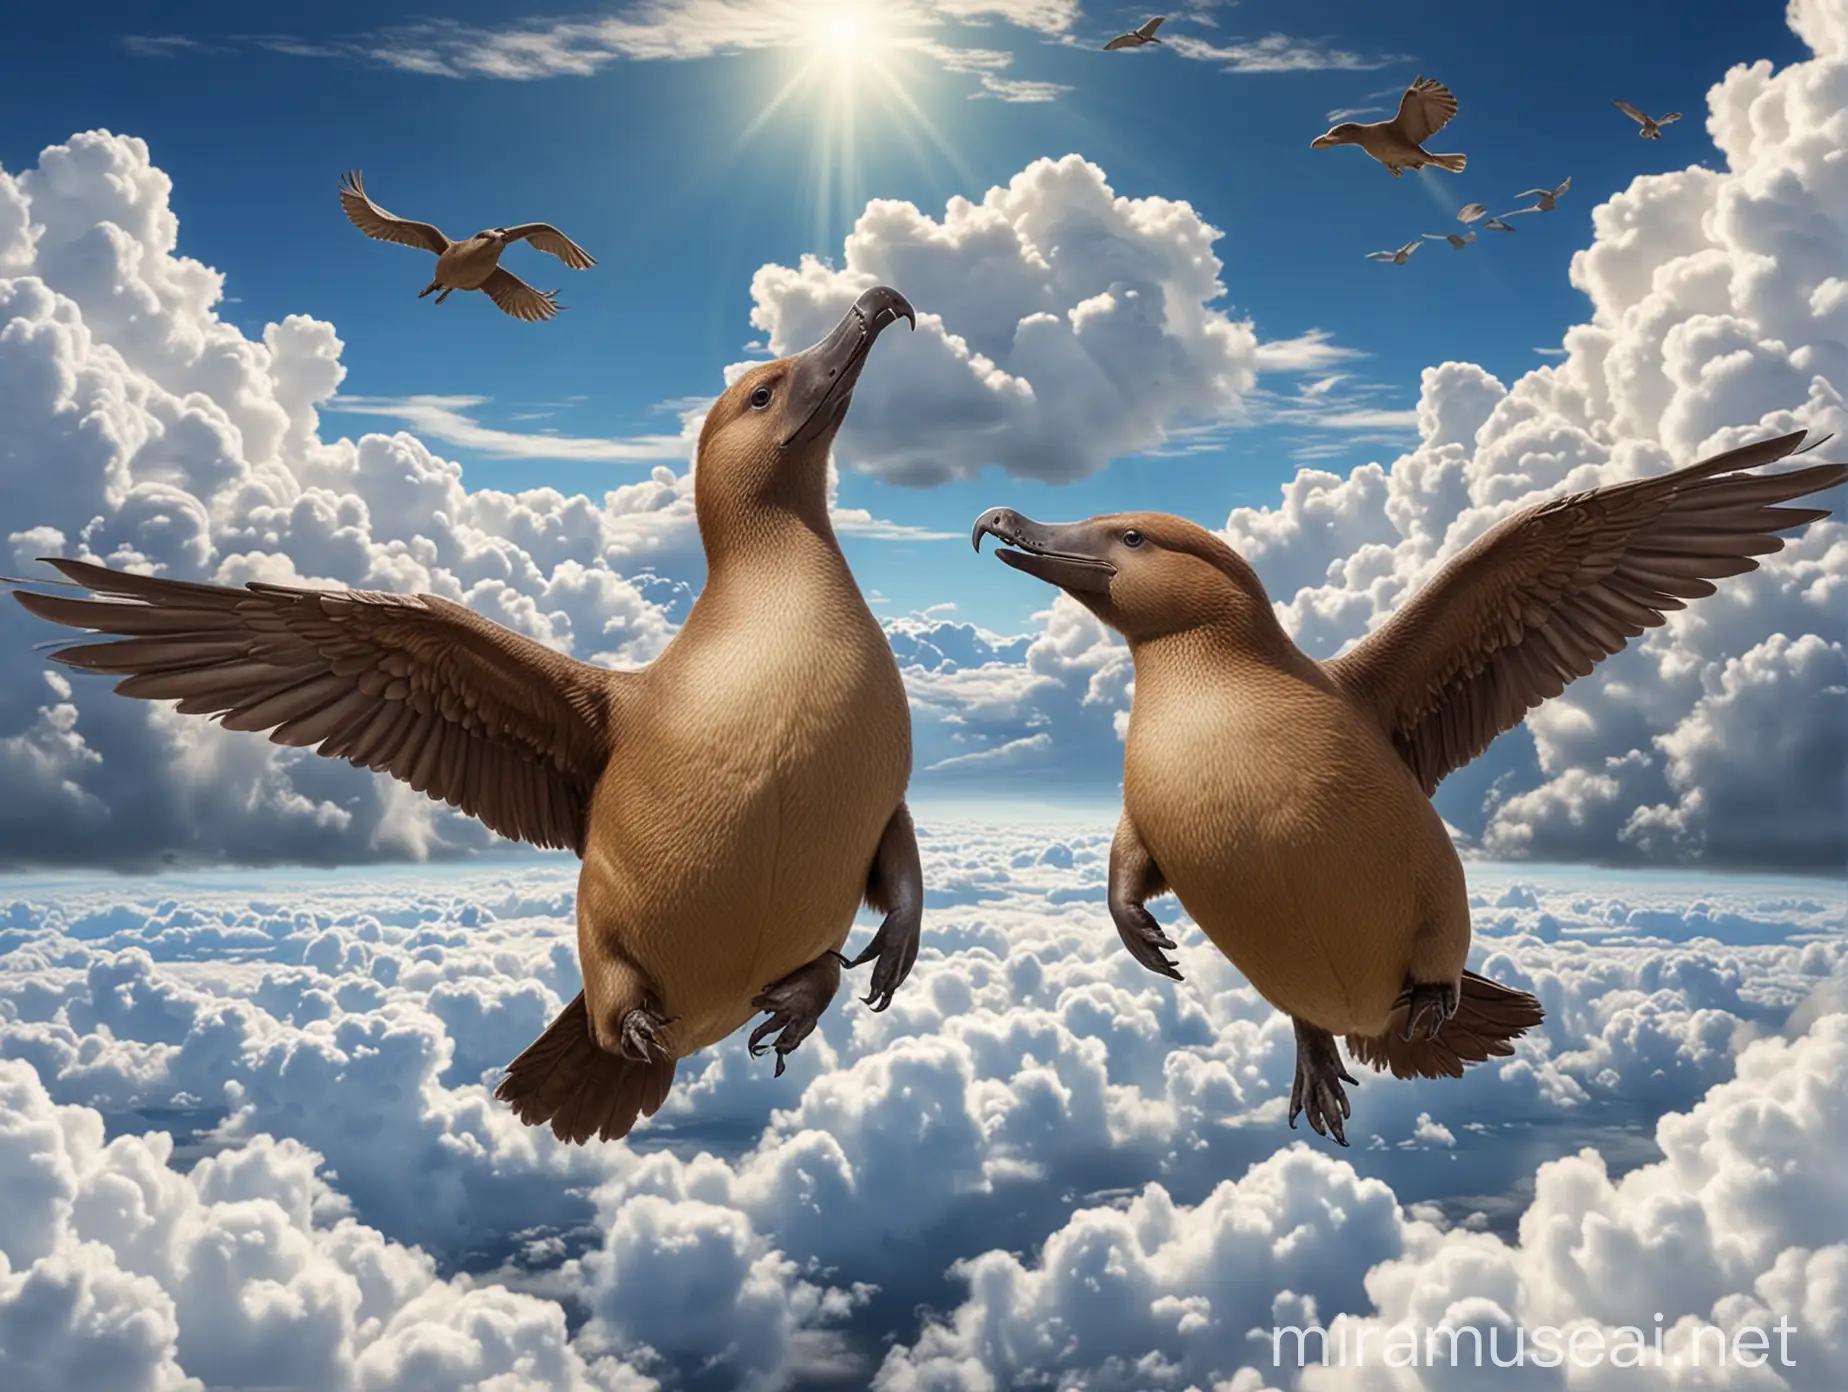 A kiwi (bird) and a platypus (mammal) are in heaven, All very detailed, they are up in the clouds